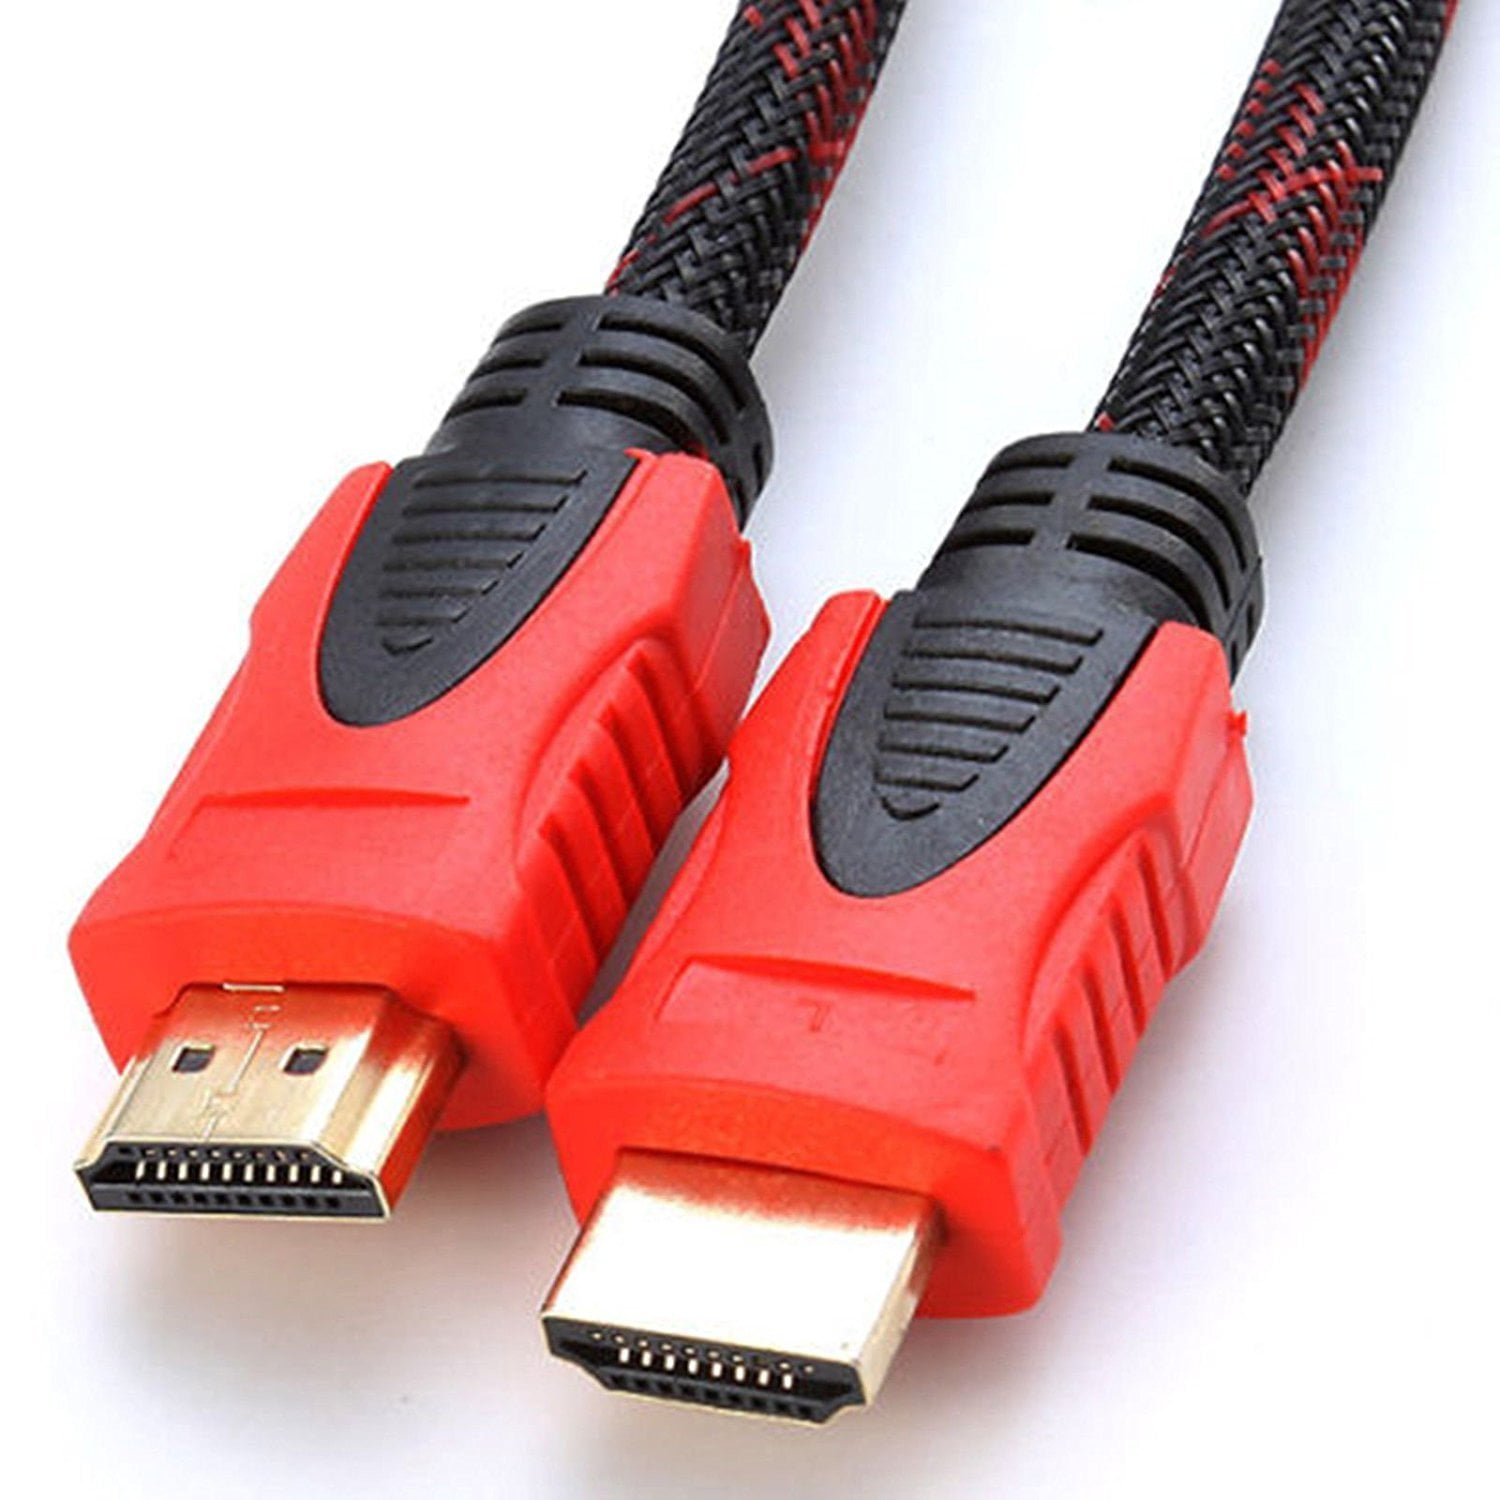 4K Ultra HD Premium HDMI Cable V1.4 3D High Speed Ethernet 3FT~ 30FT Gold Plated 